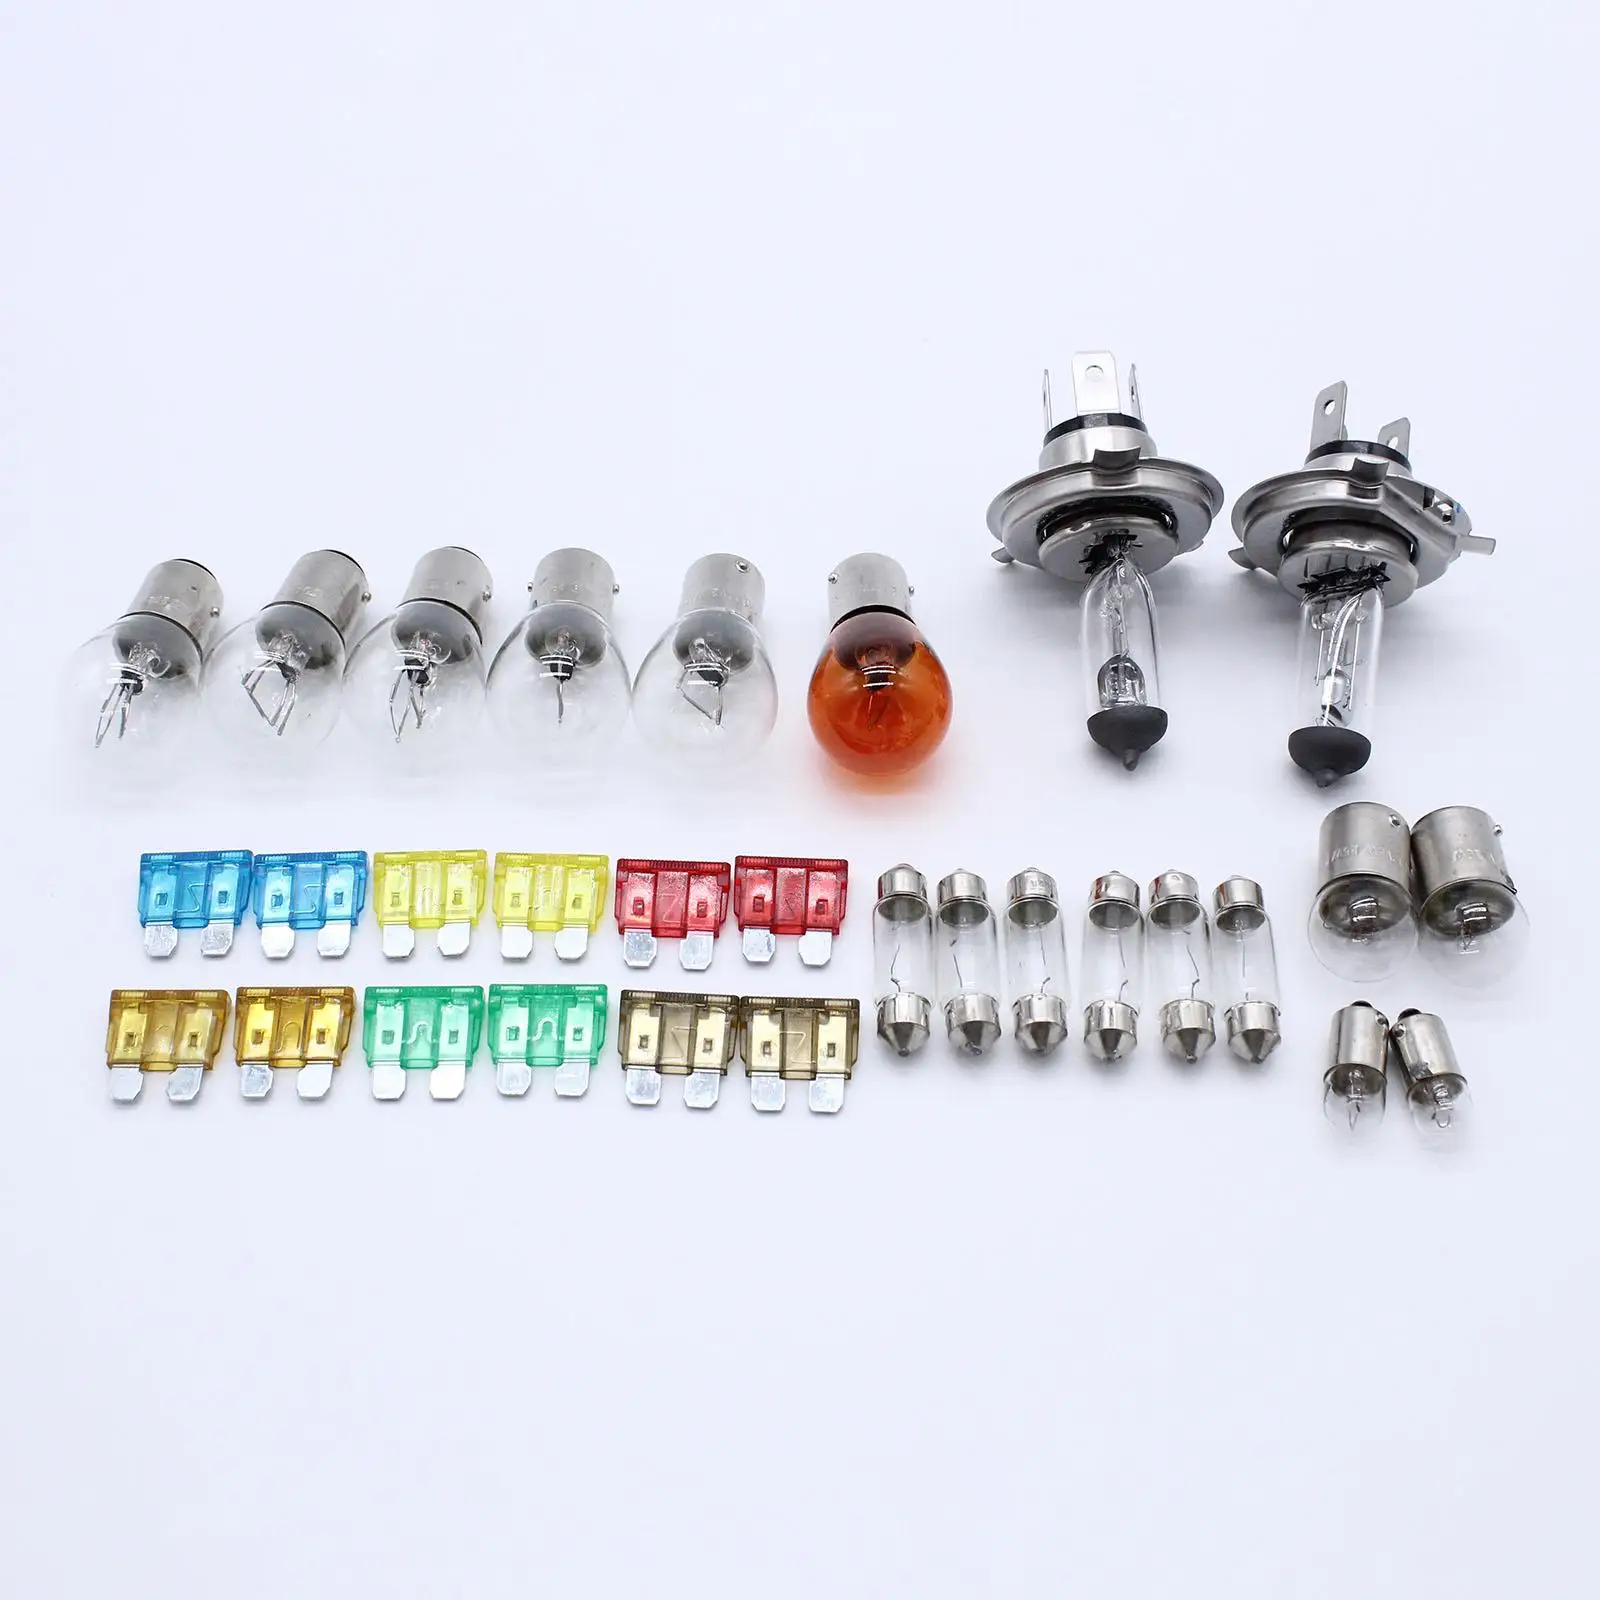 30 Pieces H4 Light Bulb Kit Set Replacement Super Bright for Motorcycle